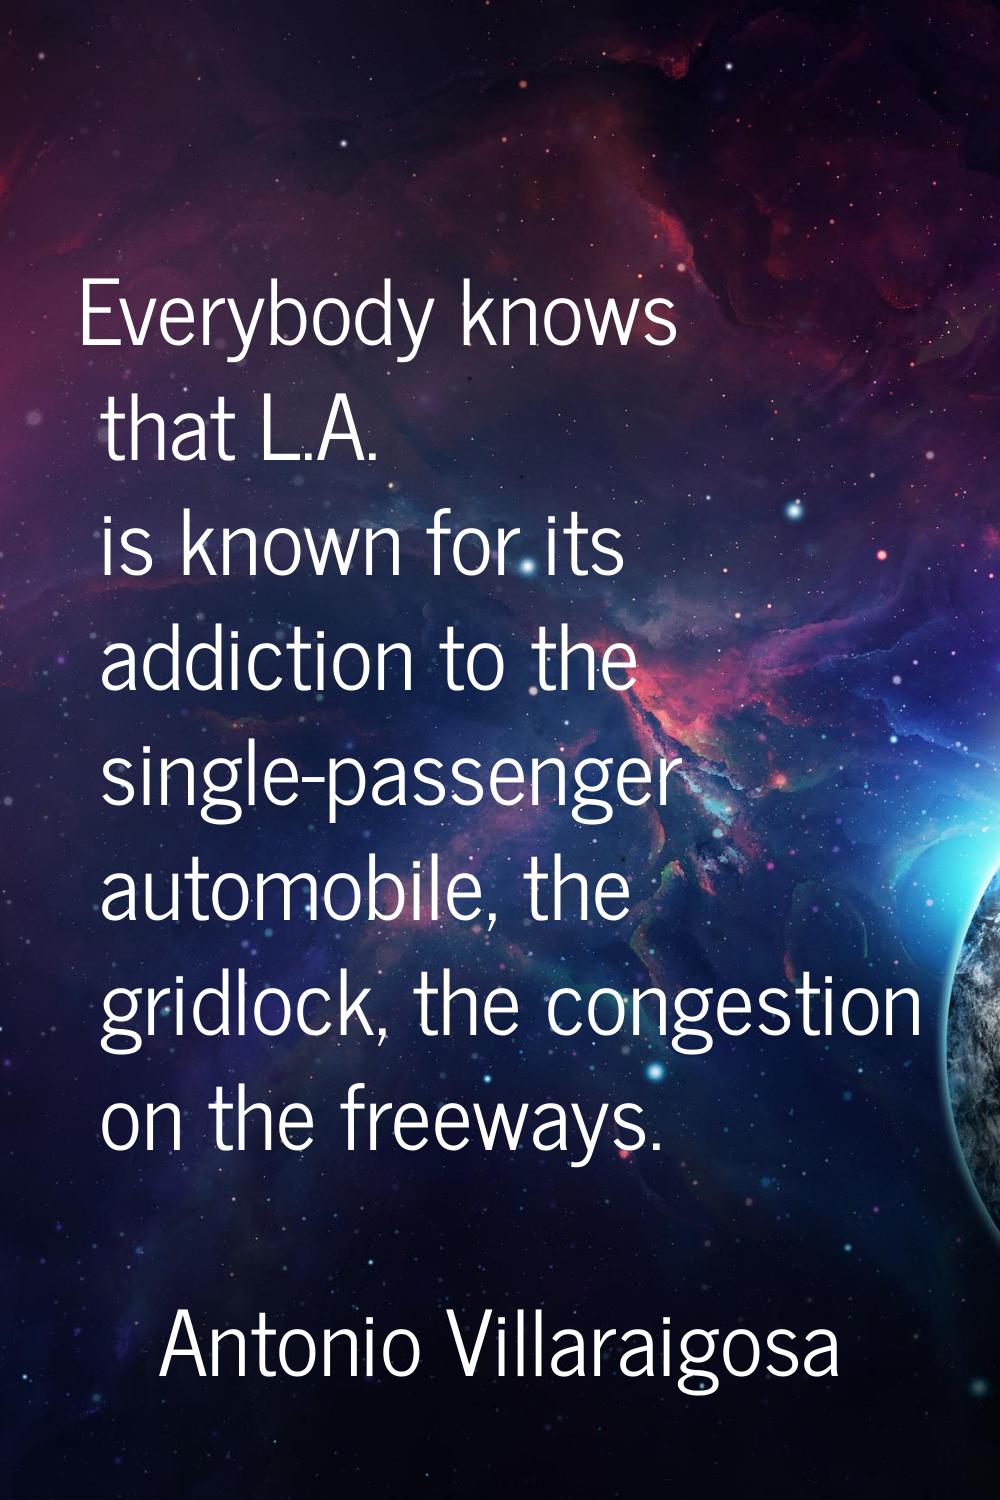 Everybody knows that L.A. is known for its addiction to the single-passenger automobile, the gridlo